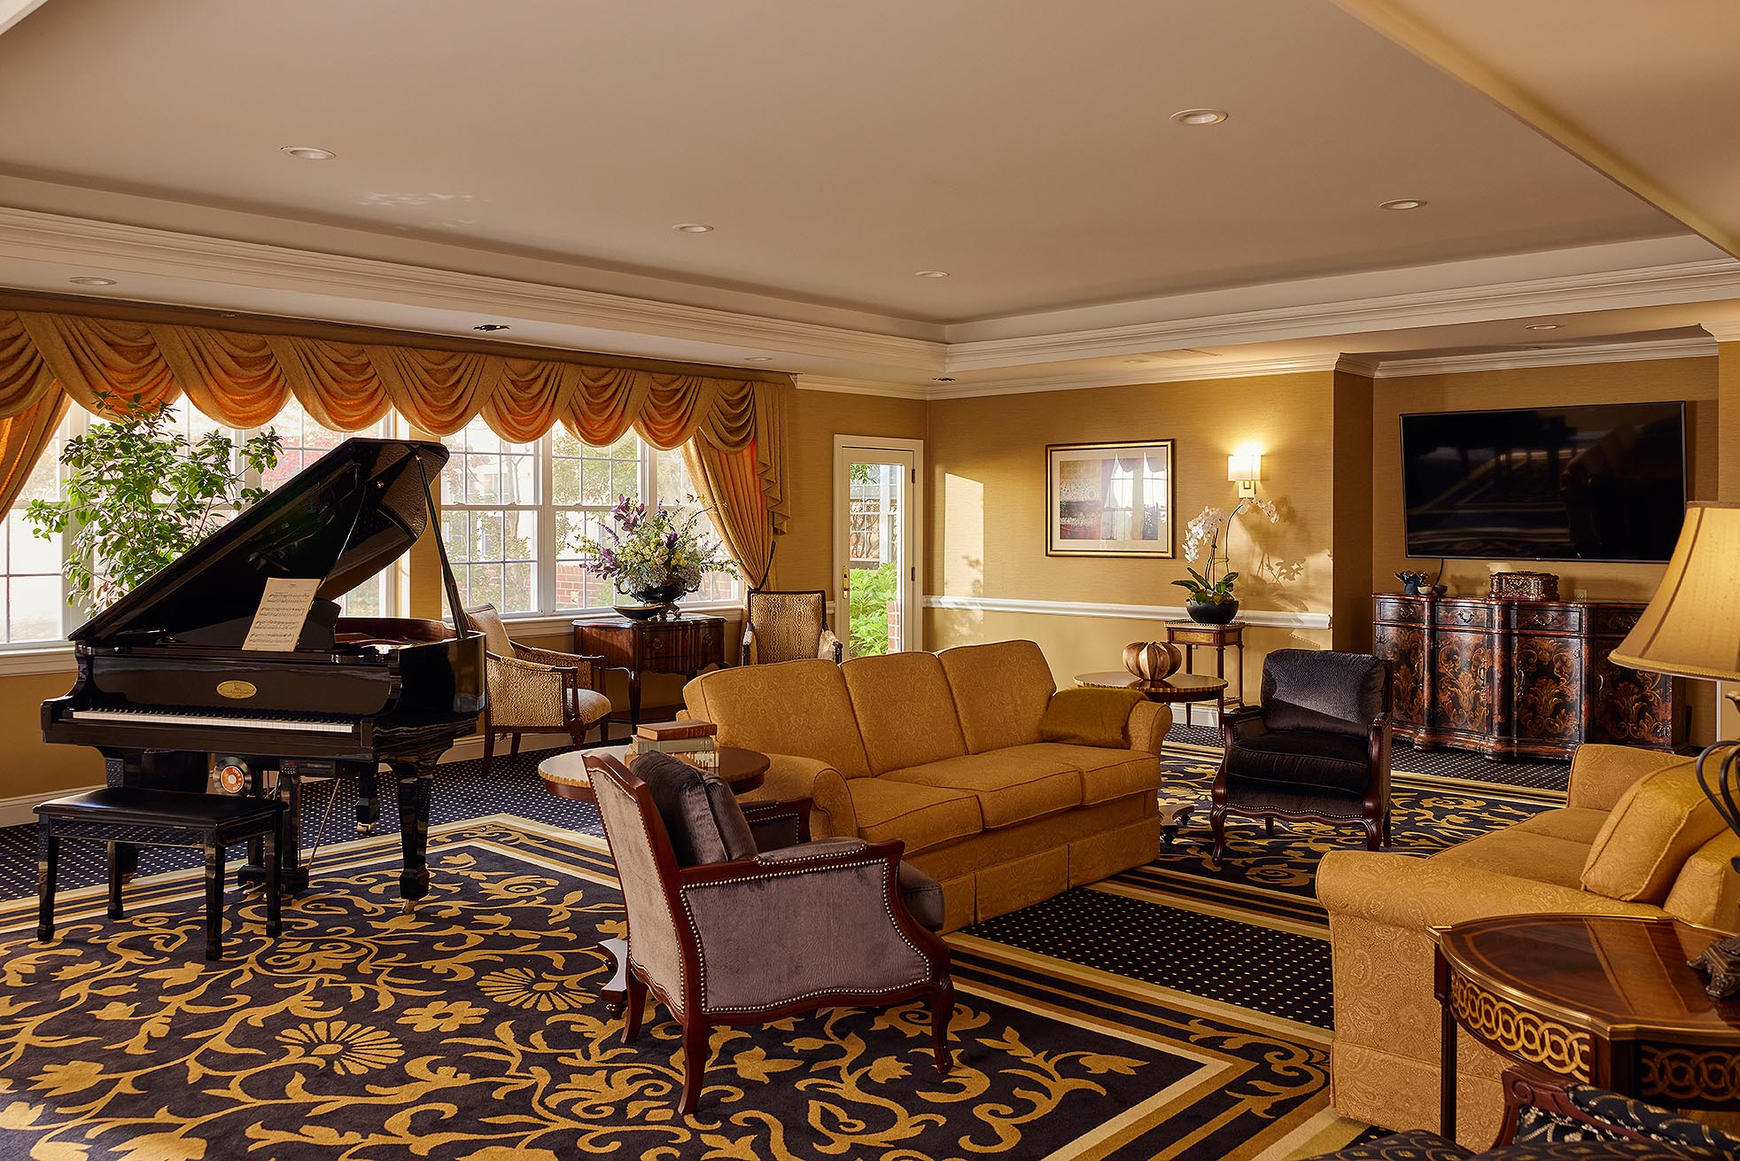 A baby grand piano with armchairs and sofas in the living room